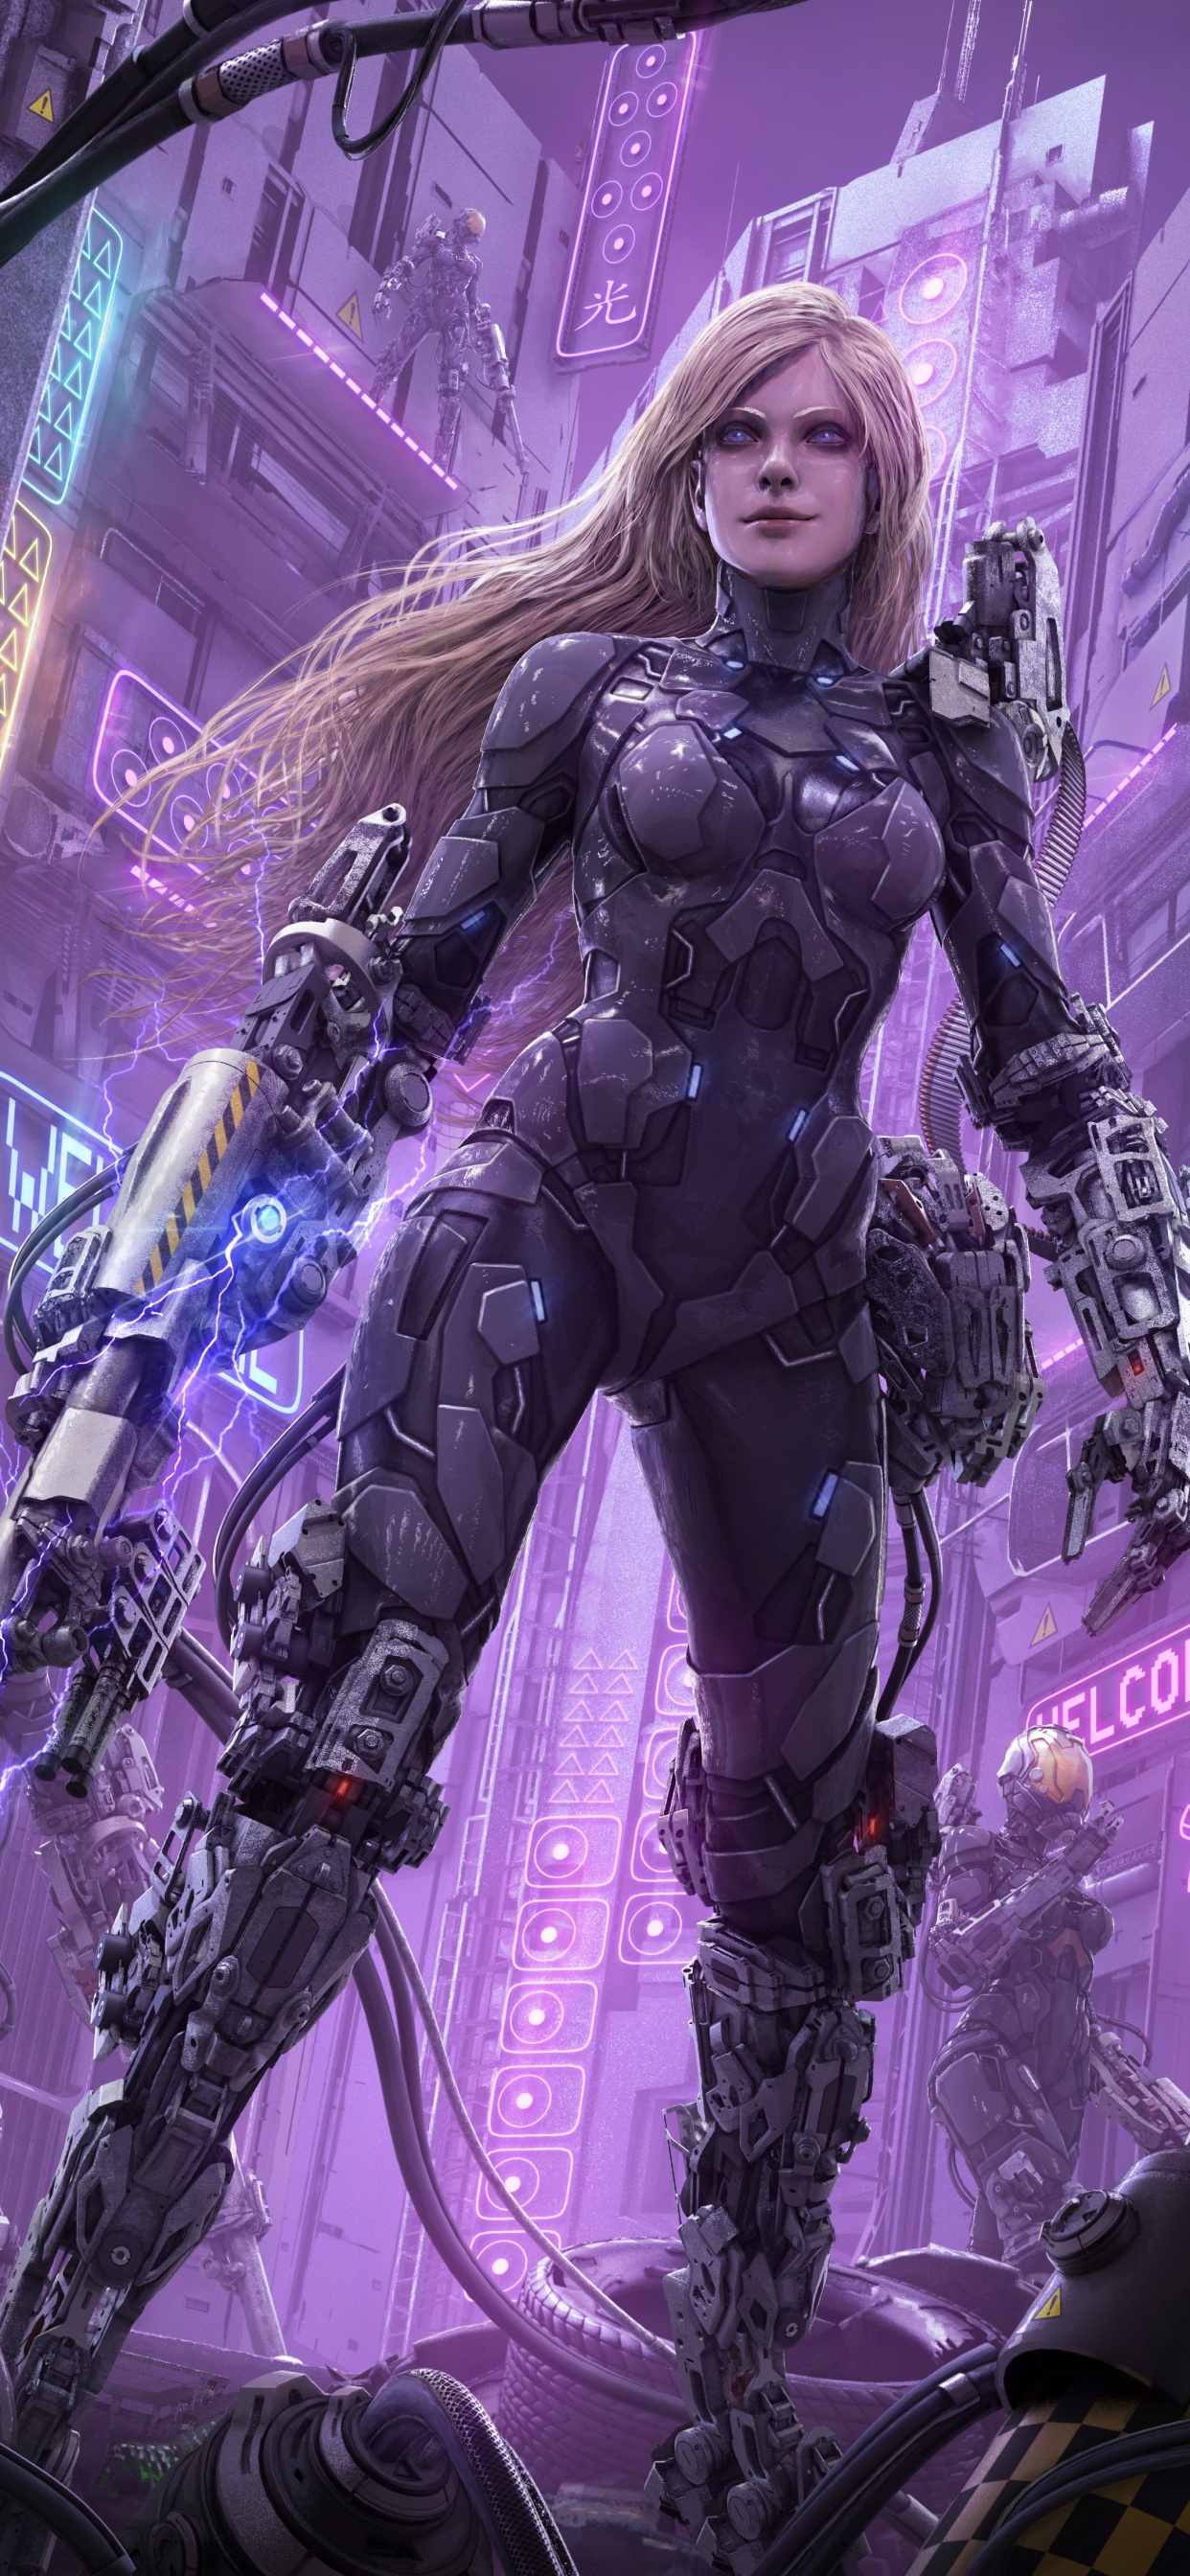 Cyberpunk, Science Fiction, Purple, pc Game, Games. Wallpaper in 1242x2688 Resolution